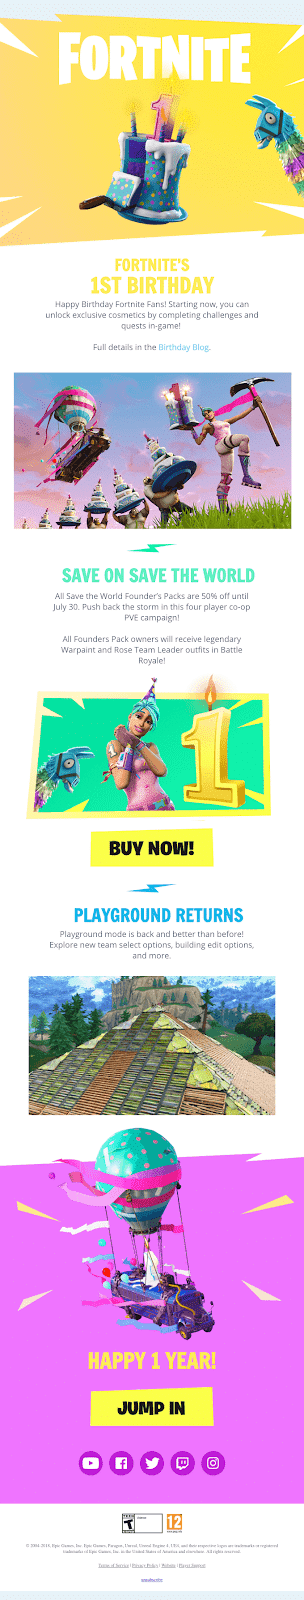 graphics in email copy - Fortnite